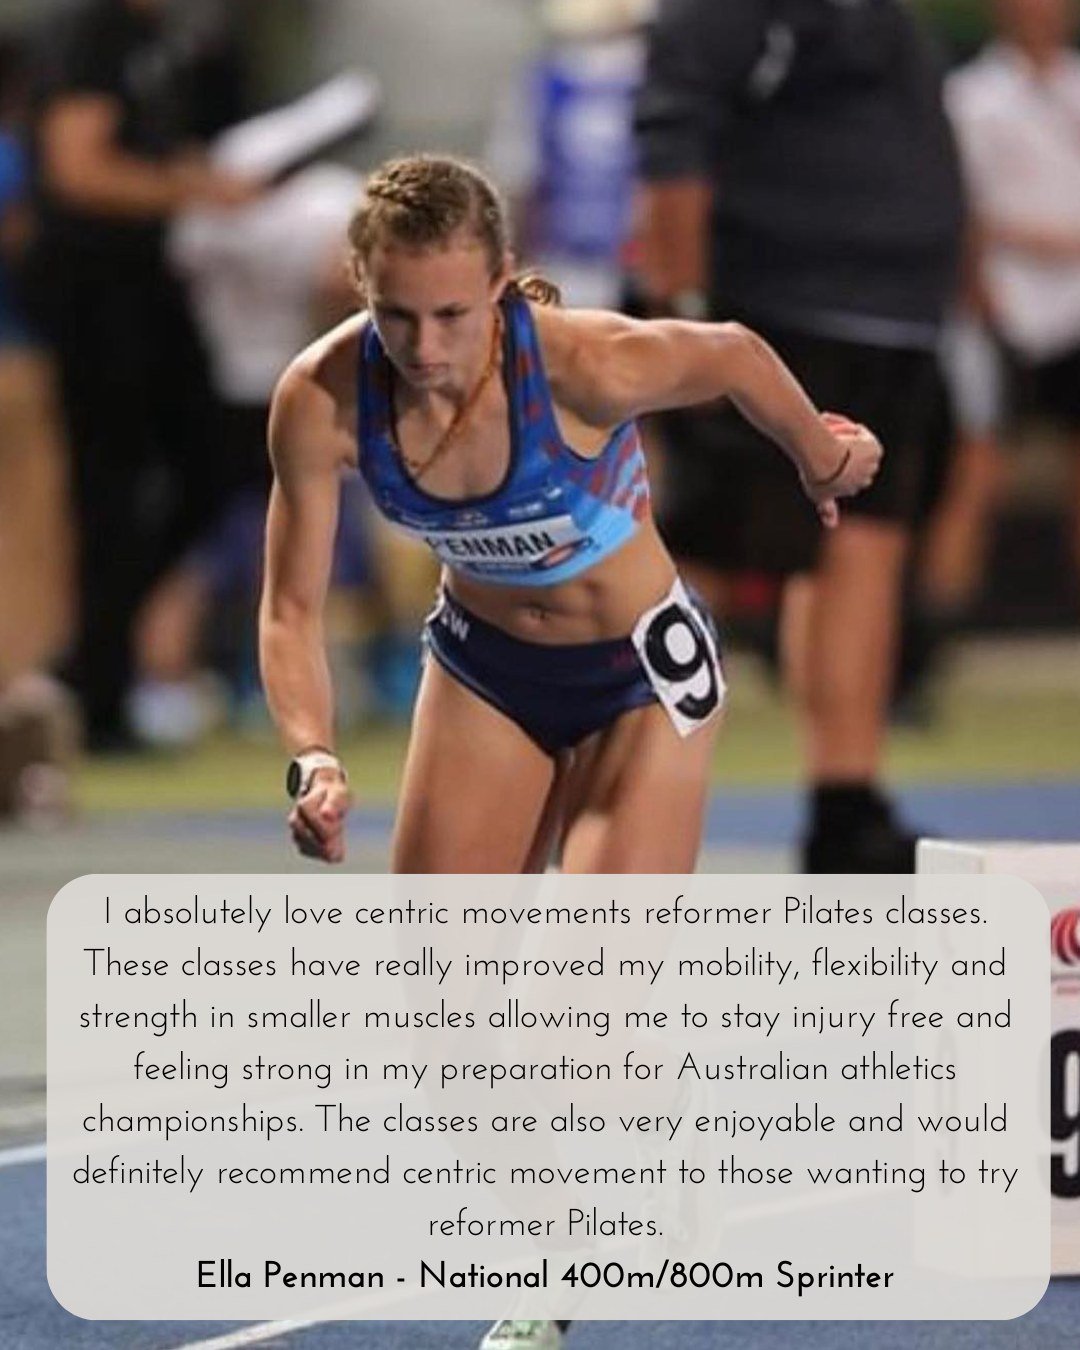 Ella Penman finished 5th in Australia for 400m in U20's and hit the world qualifying time three times during the season. Ella includes reformer Pilates in her training schedule. Pilates helps her movement in the gym and assists in her recovery follow